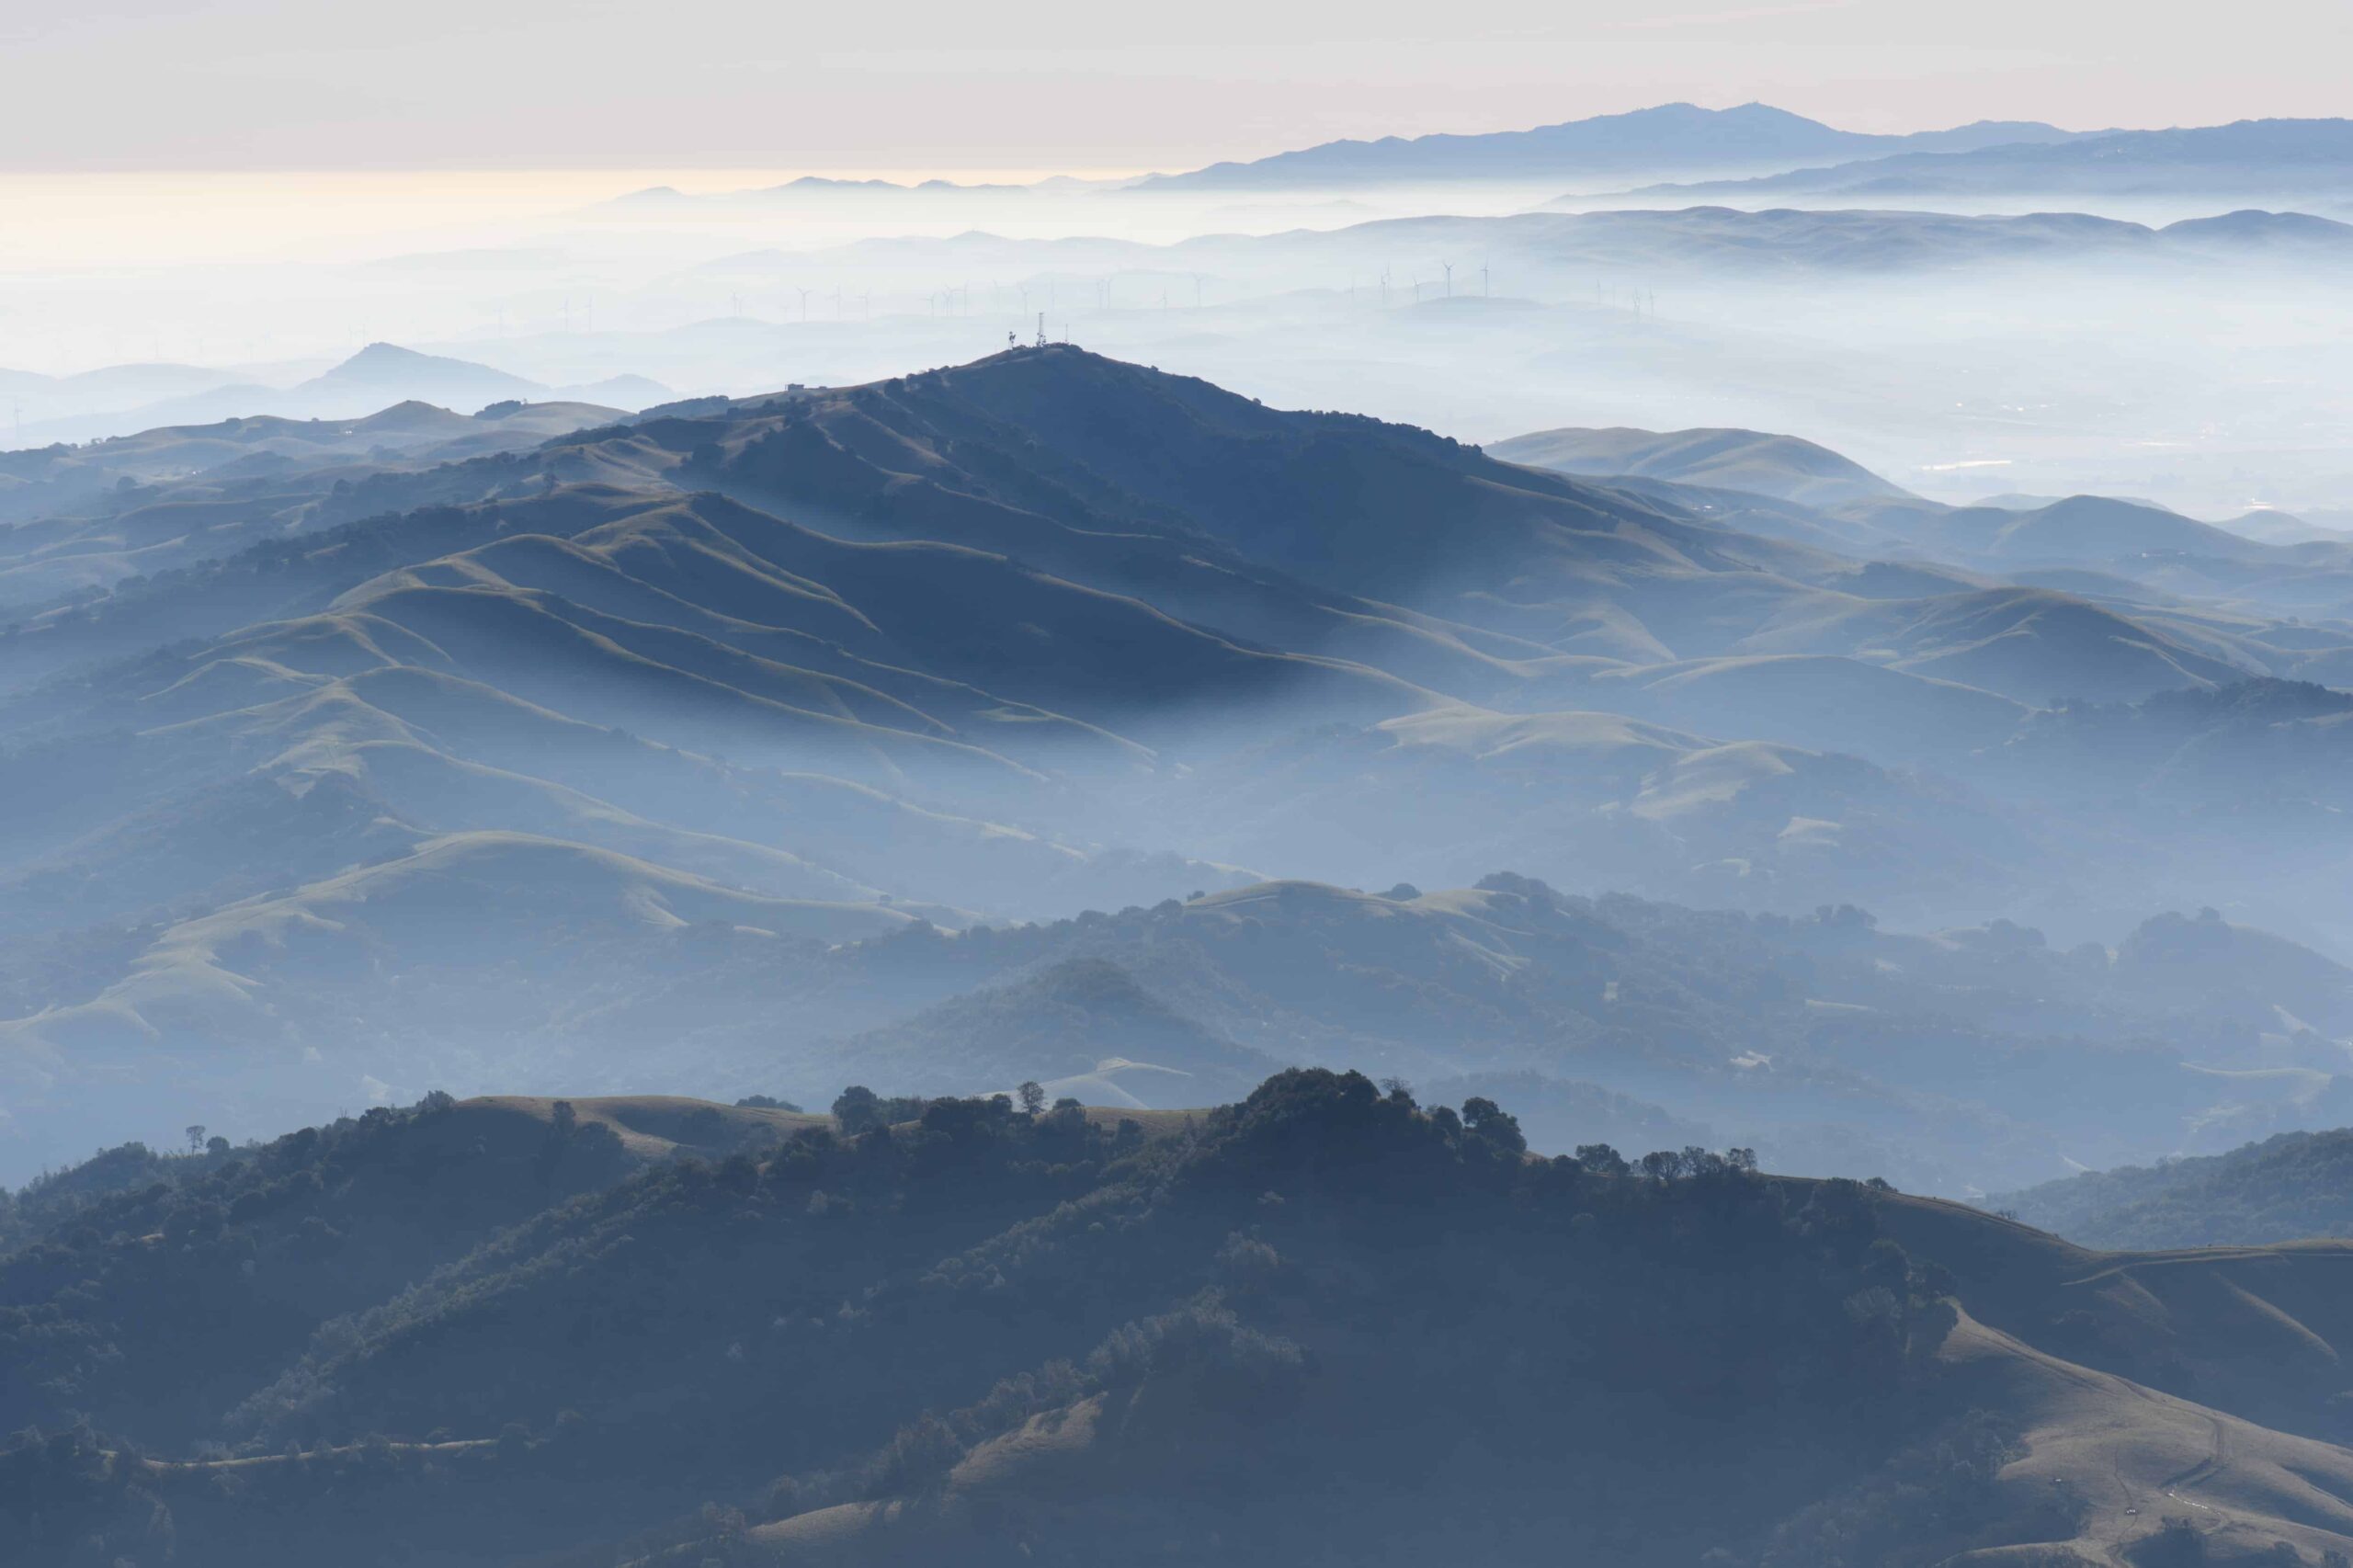 view from the top of Mount Diablo